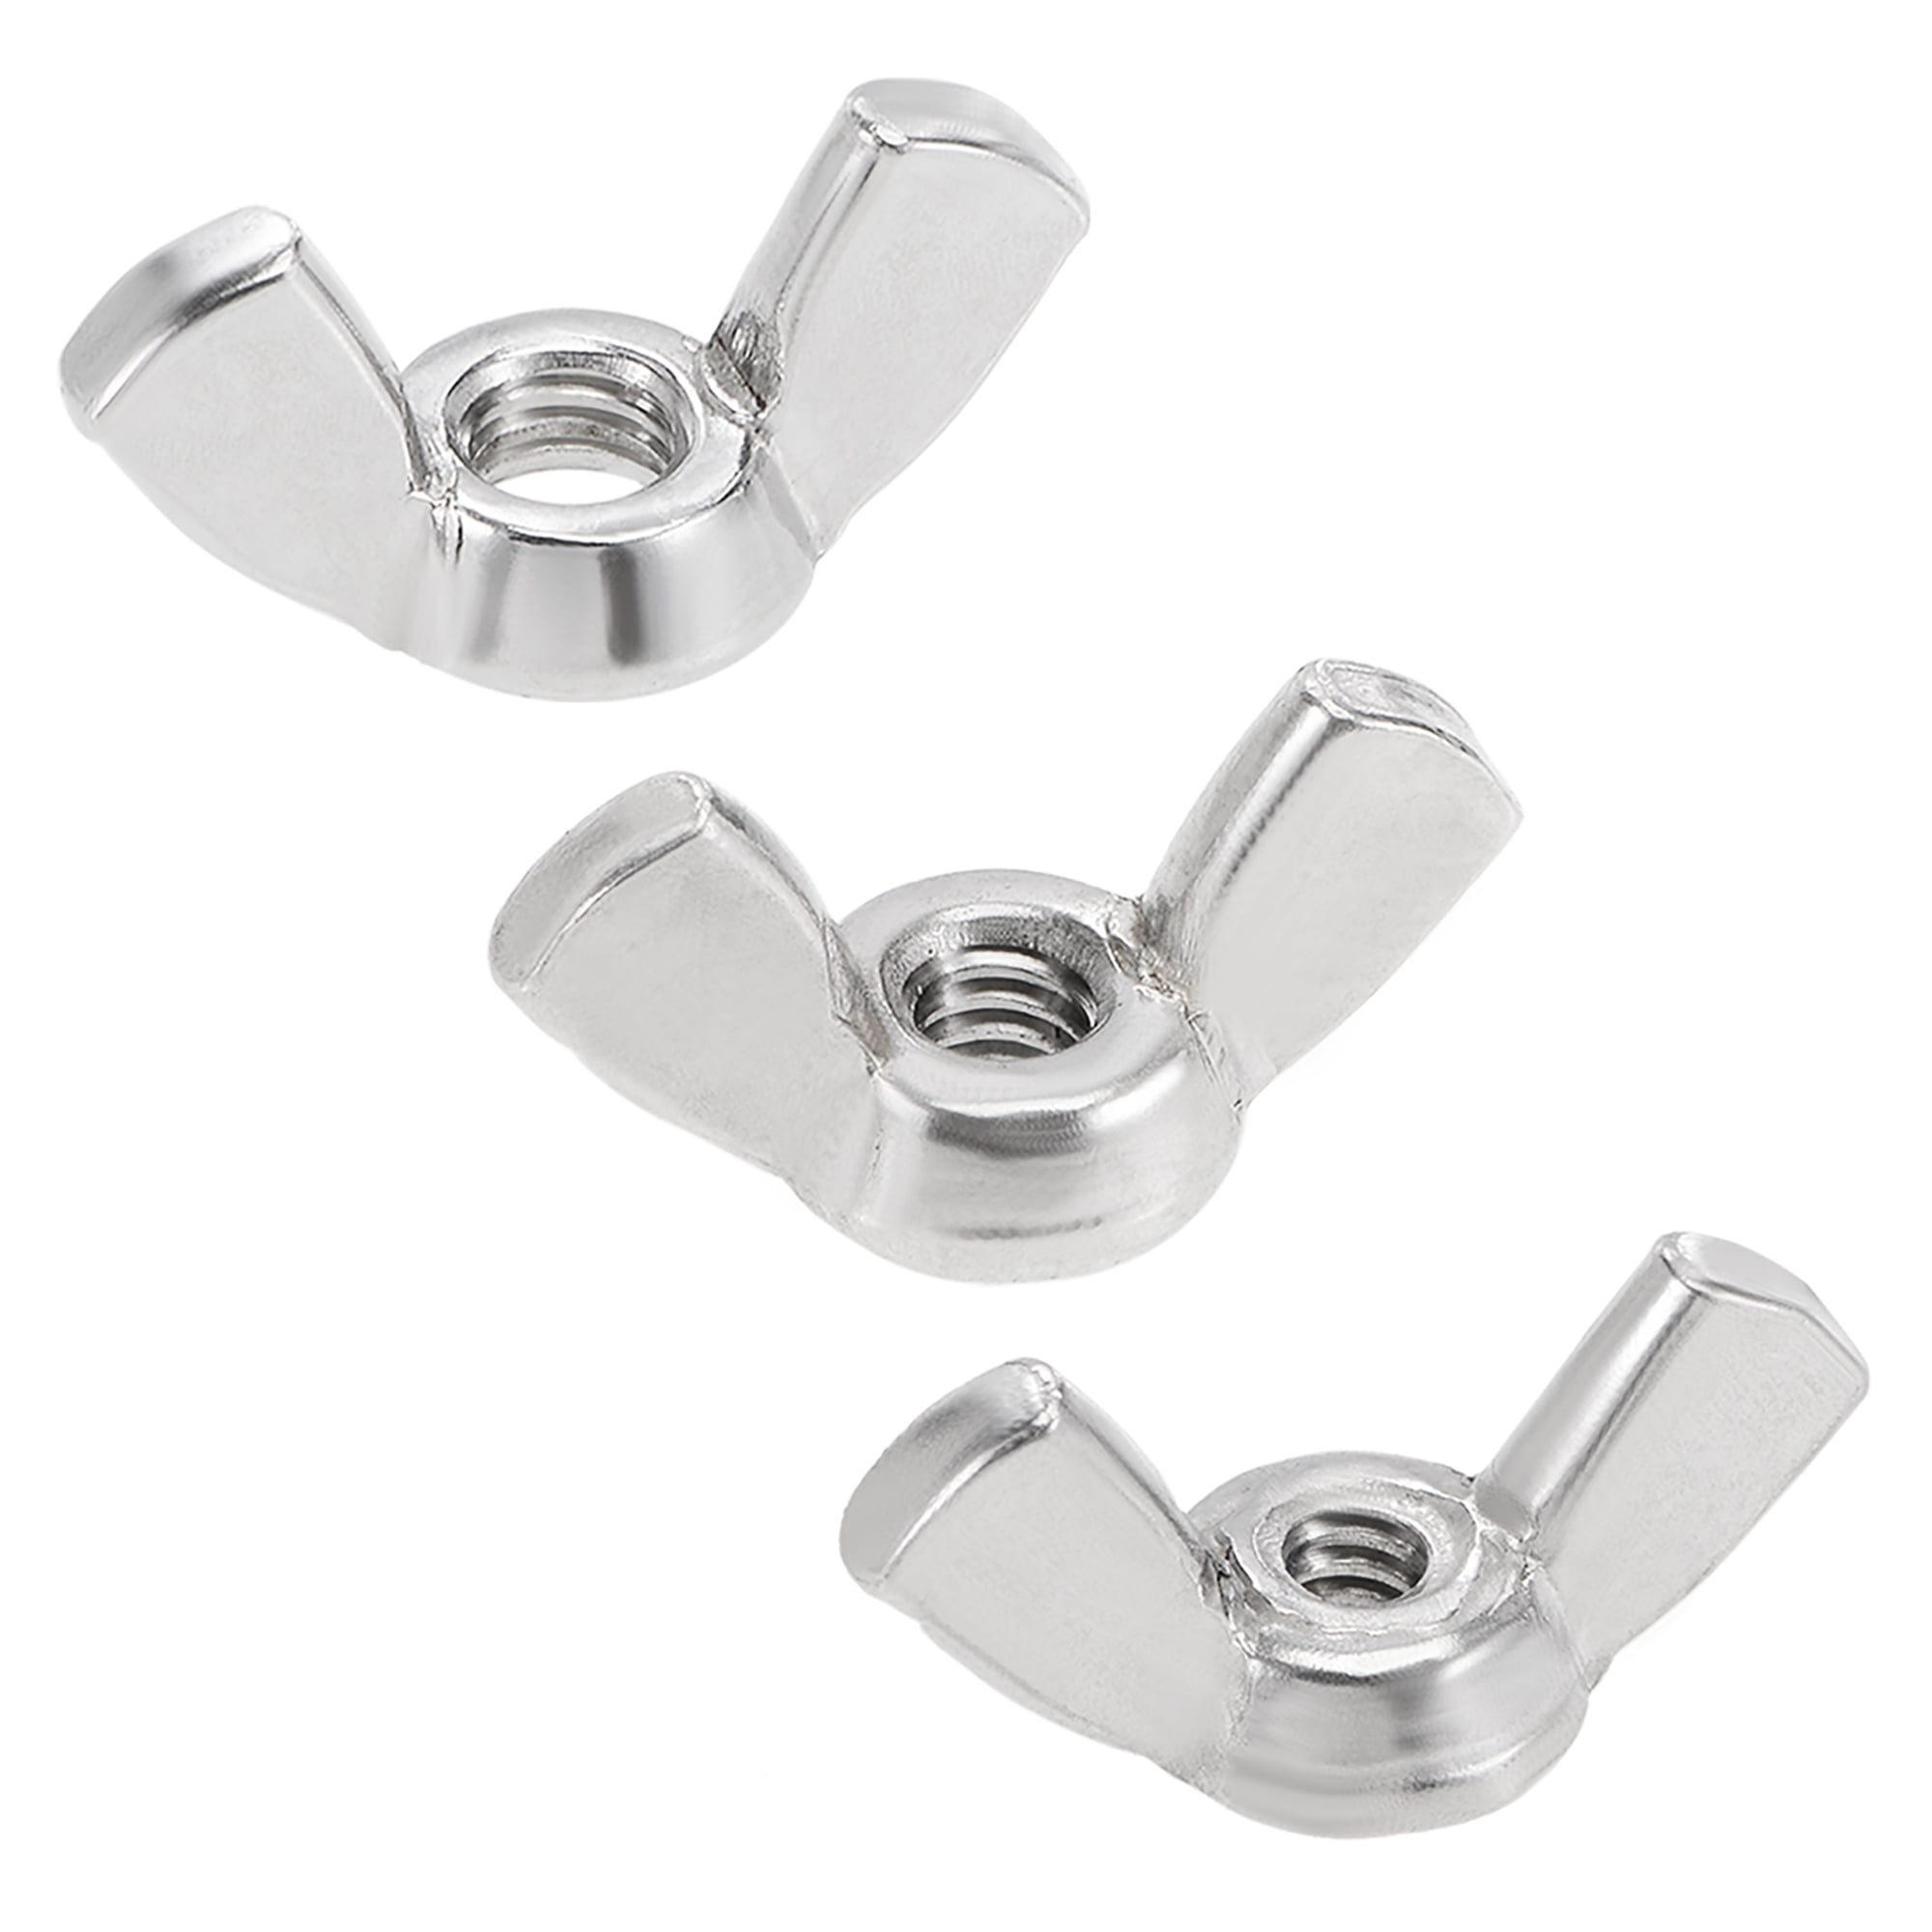 STAINLESS STEEL A2 M6 WING NUTS Hexagon Butterfly Screw/Bolt Fastener EASY TWIST